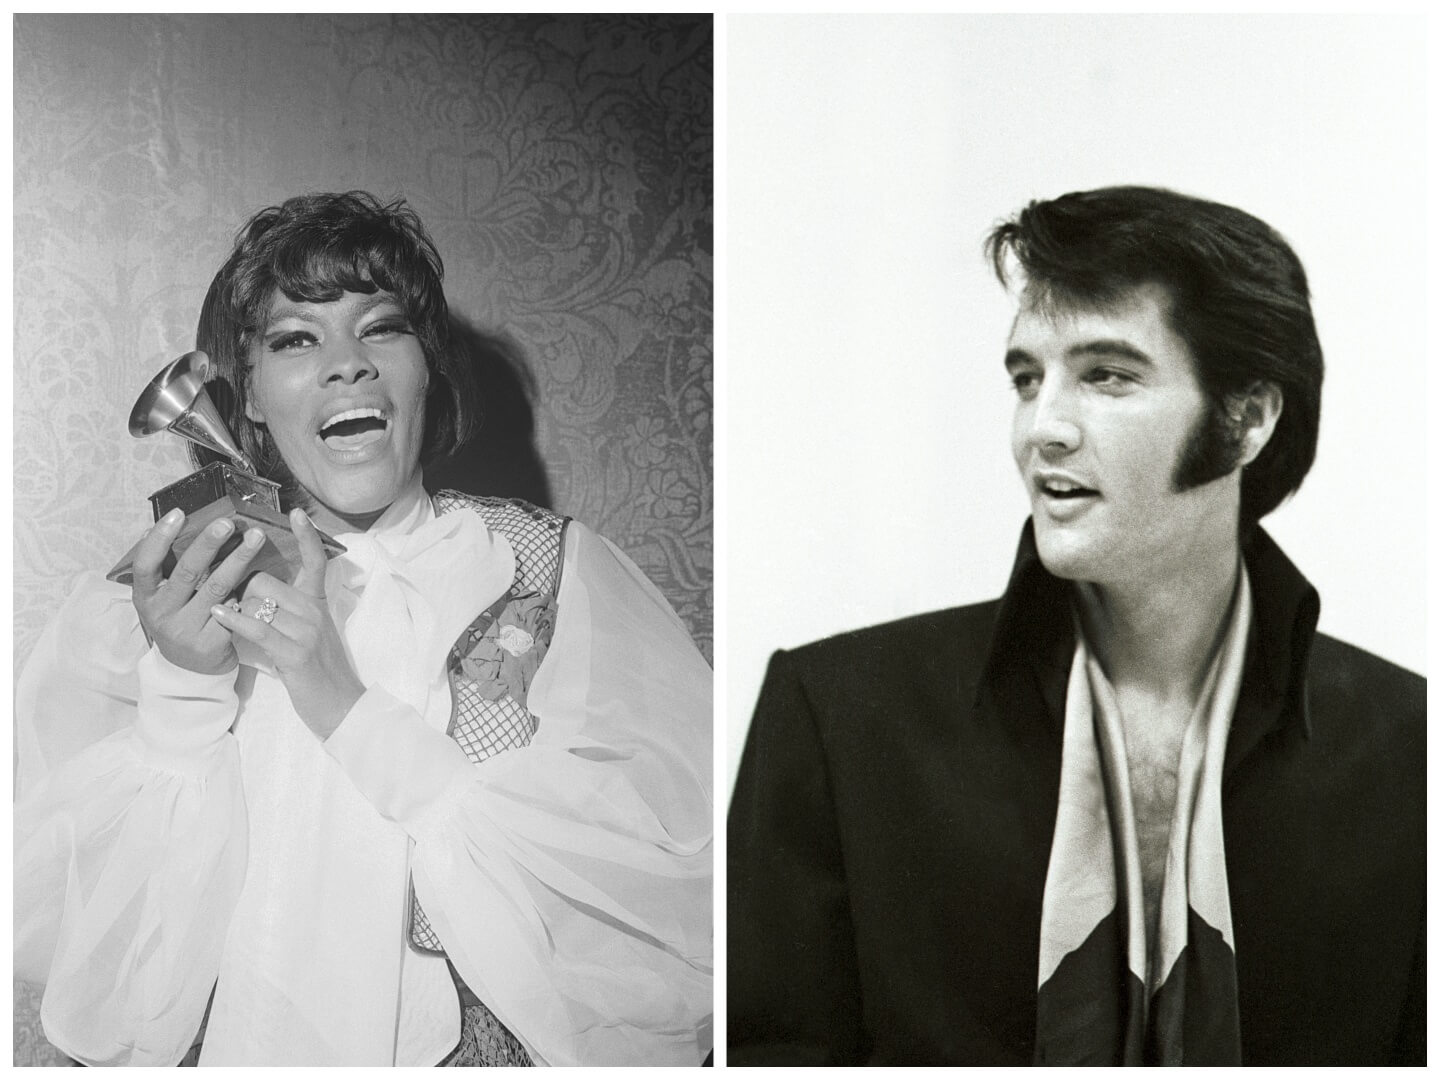 A black and white picture of Dionne Warwick holding a Grammy award. Elvis wears a black jacket and turns his head to the side.